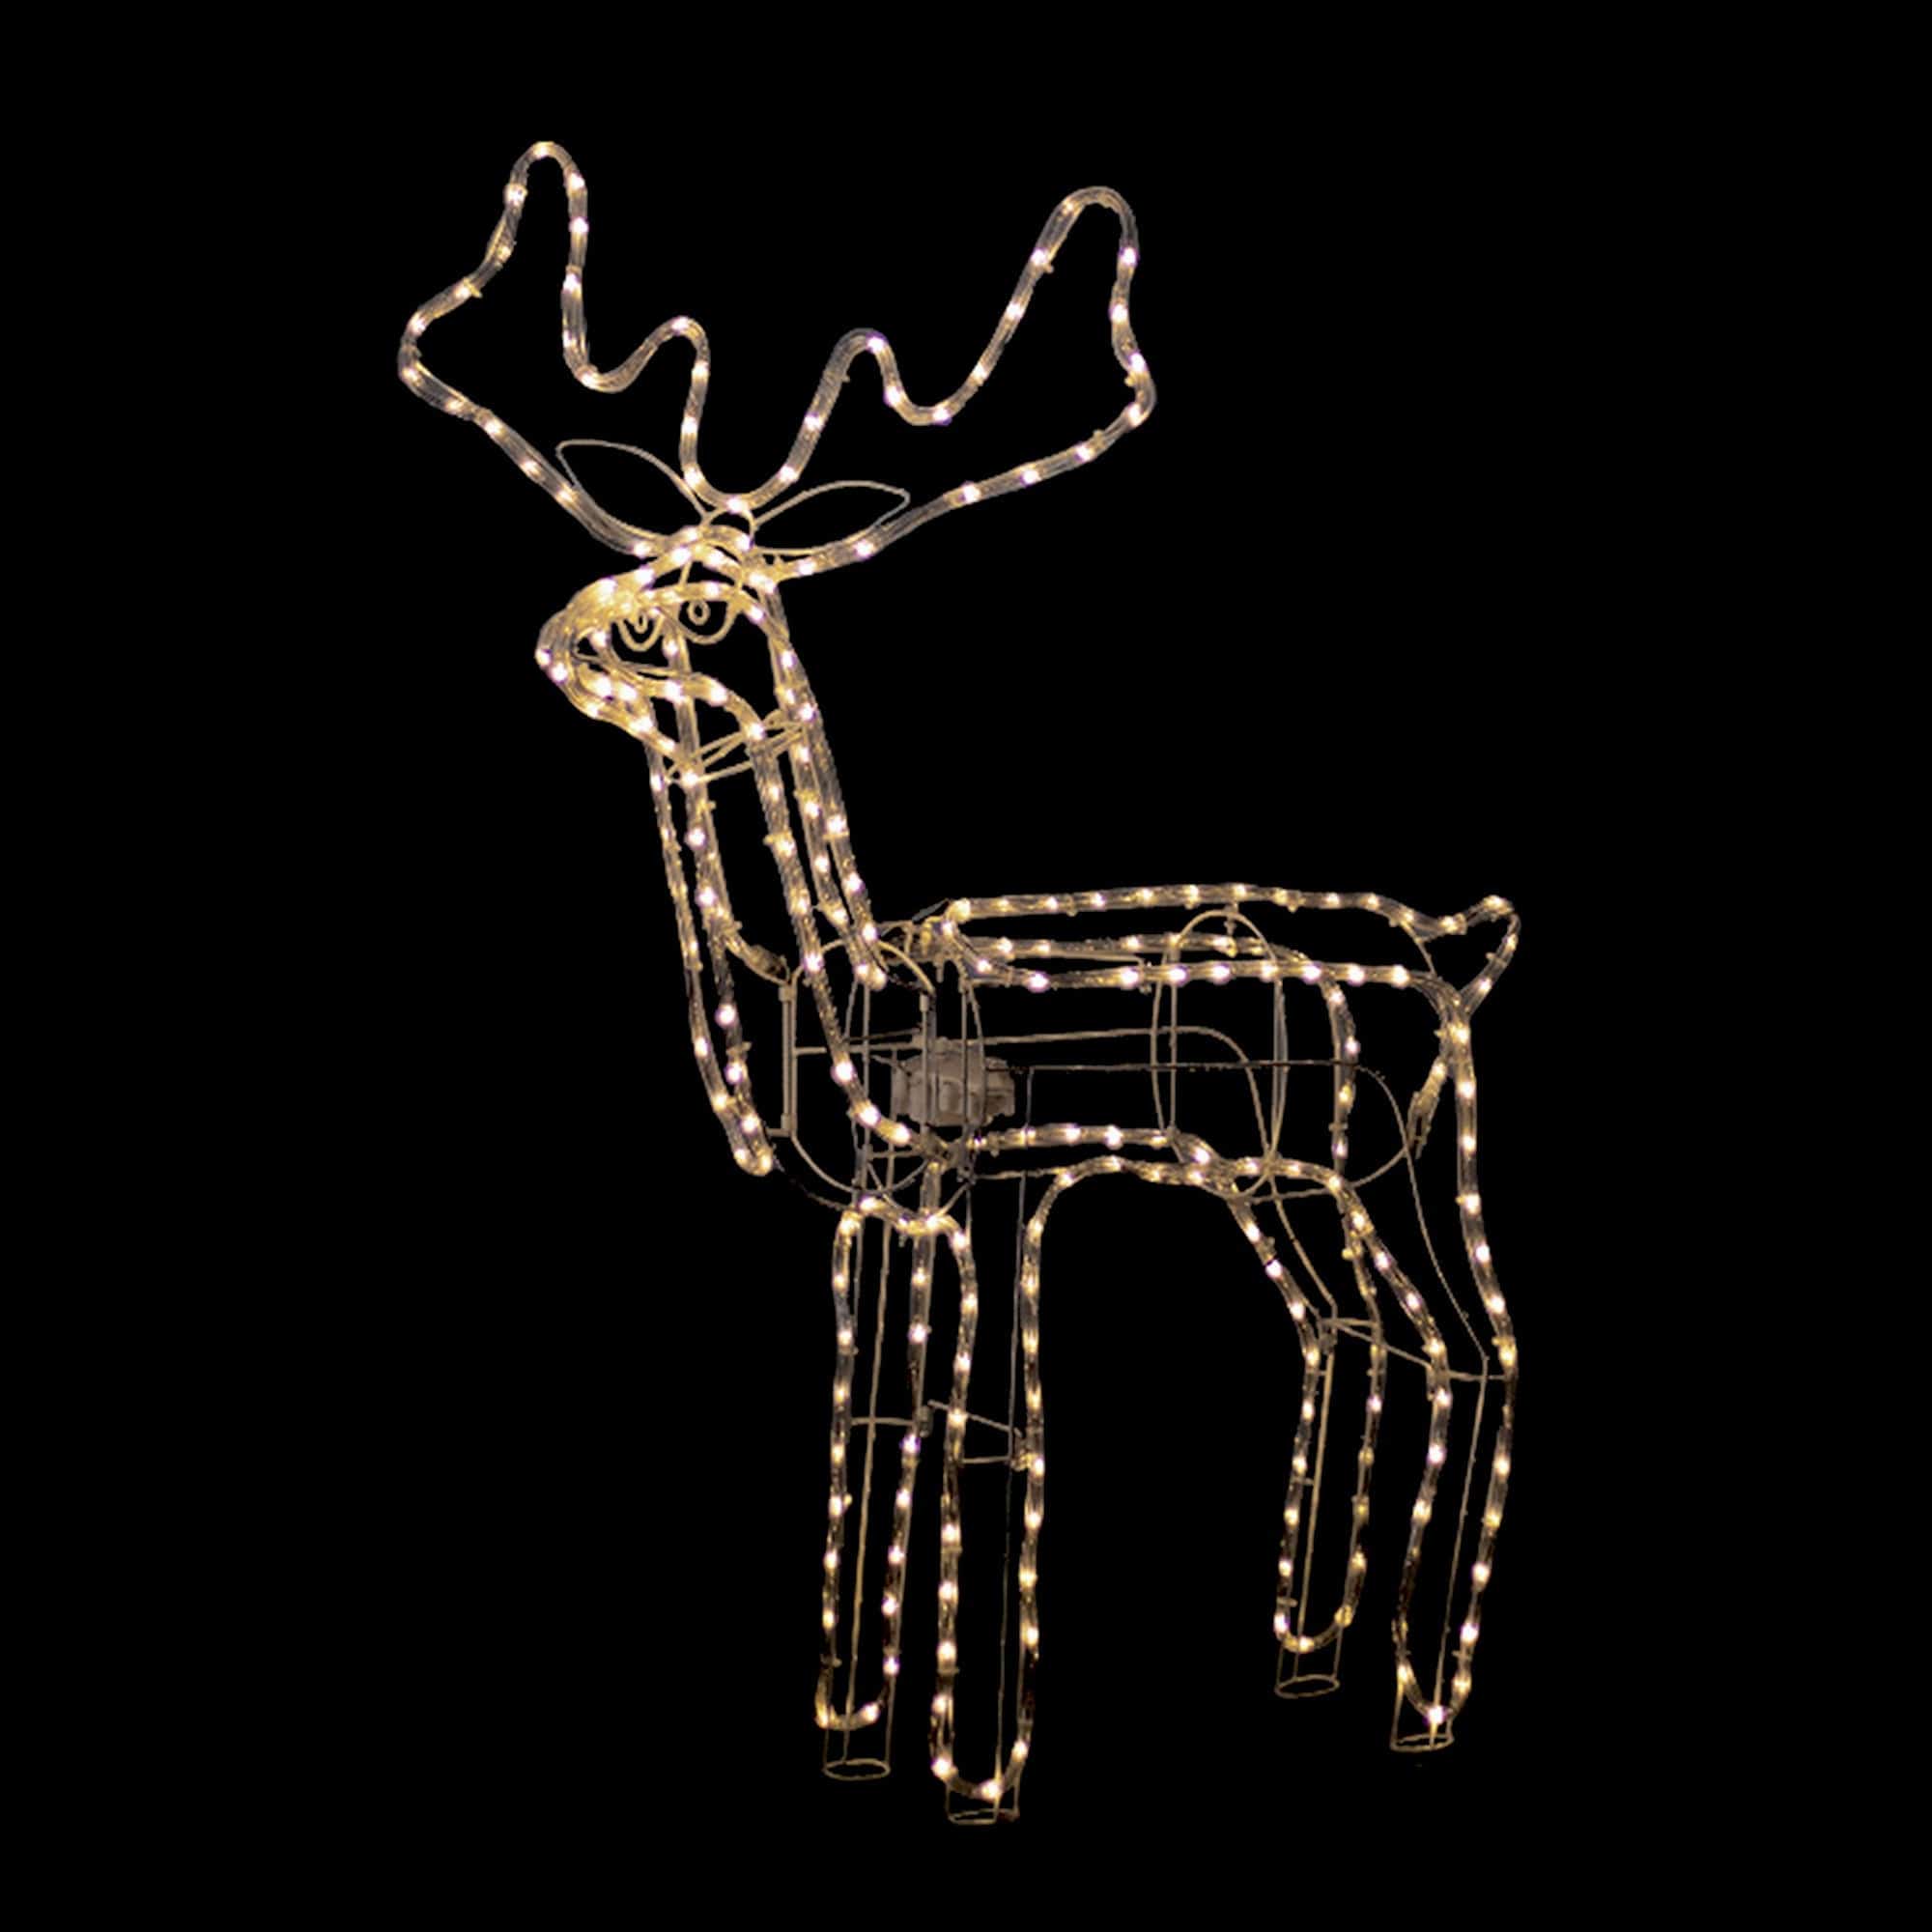 Promo Christmas Figure Warm White 3D Illuminated LED Reindeer with Motor | Three Colour Options LL0013R007WW-P